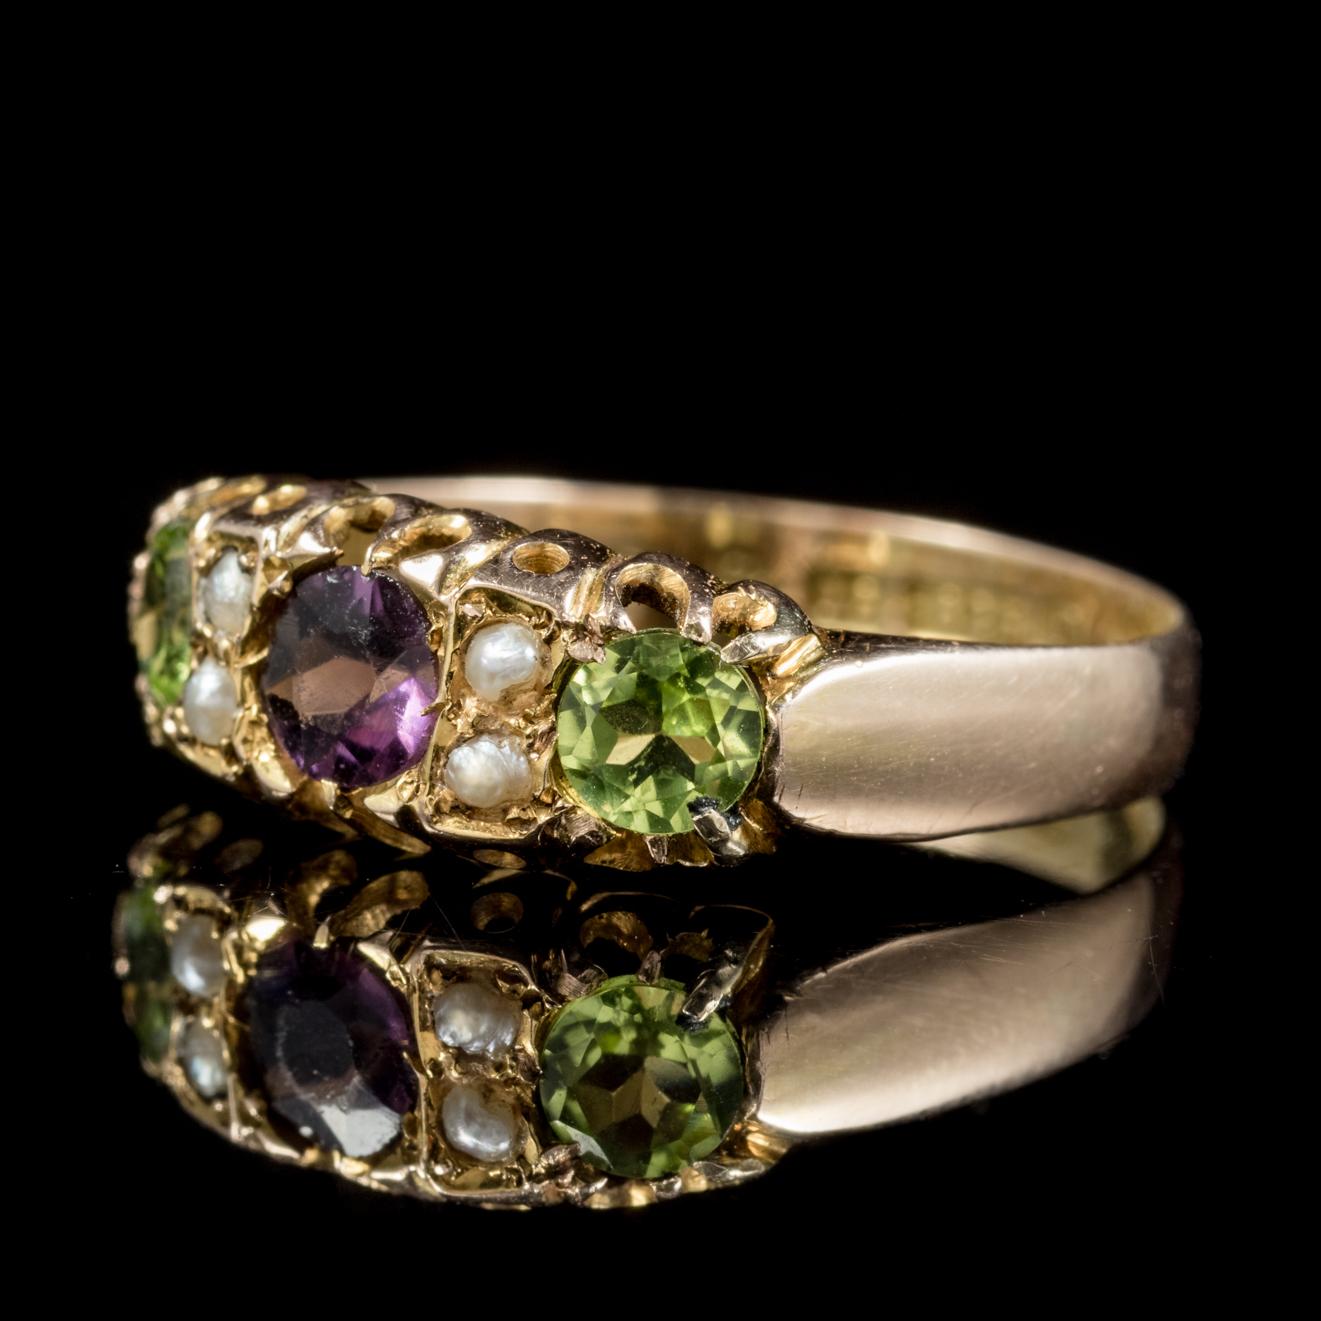 This lovely antique 18ct Gold Edwardian Suffragette ring is dated Chester, 1904. 

The fabulous piece is adorned with two green Peridots, four creamy Pearls and a violet Amethyst in the centre. 

Suffragettes liked to be depicted as feminine, their